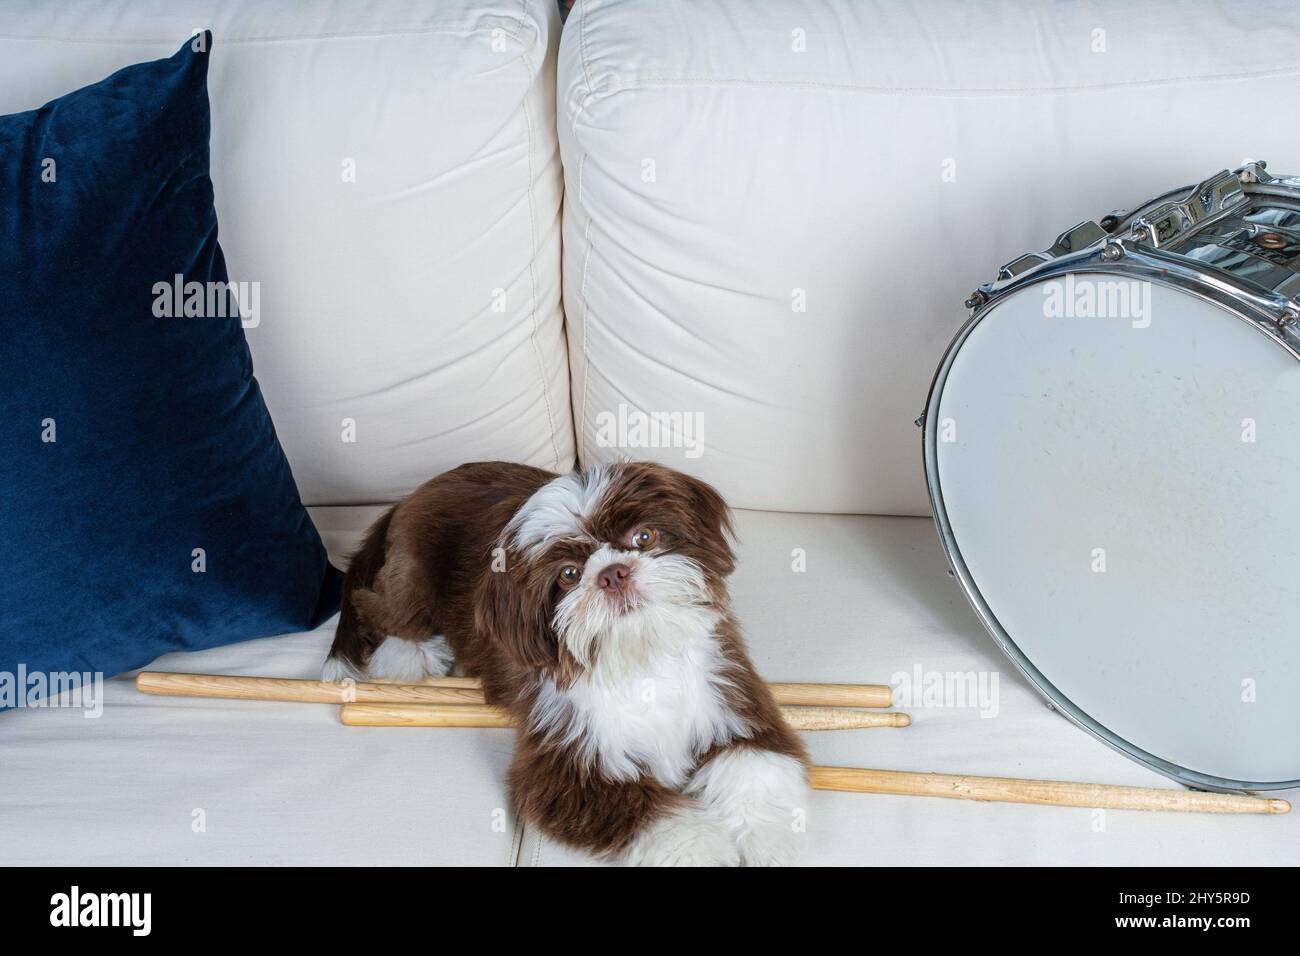 Shih tzu puppy on sofa lying on drumsticks and next to drum snare. Stock Photo